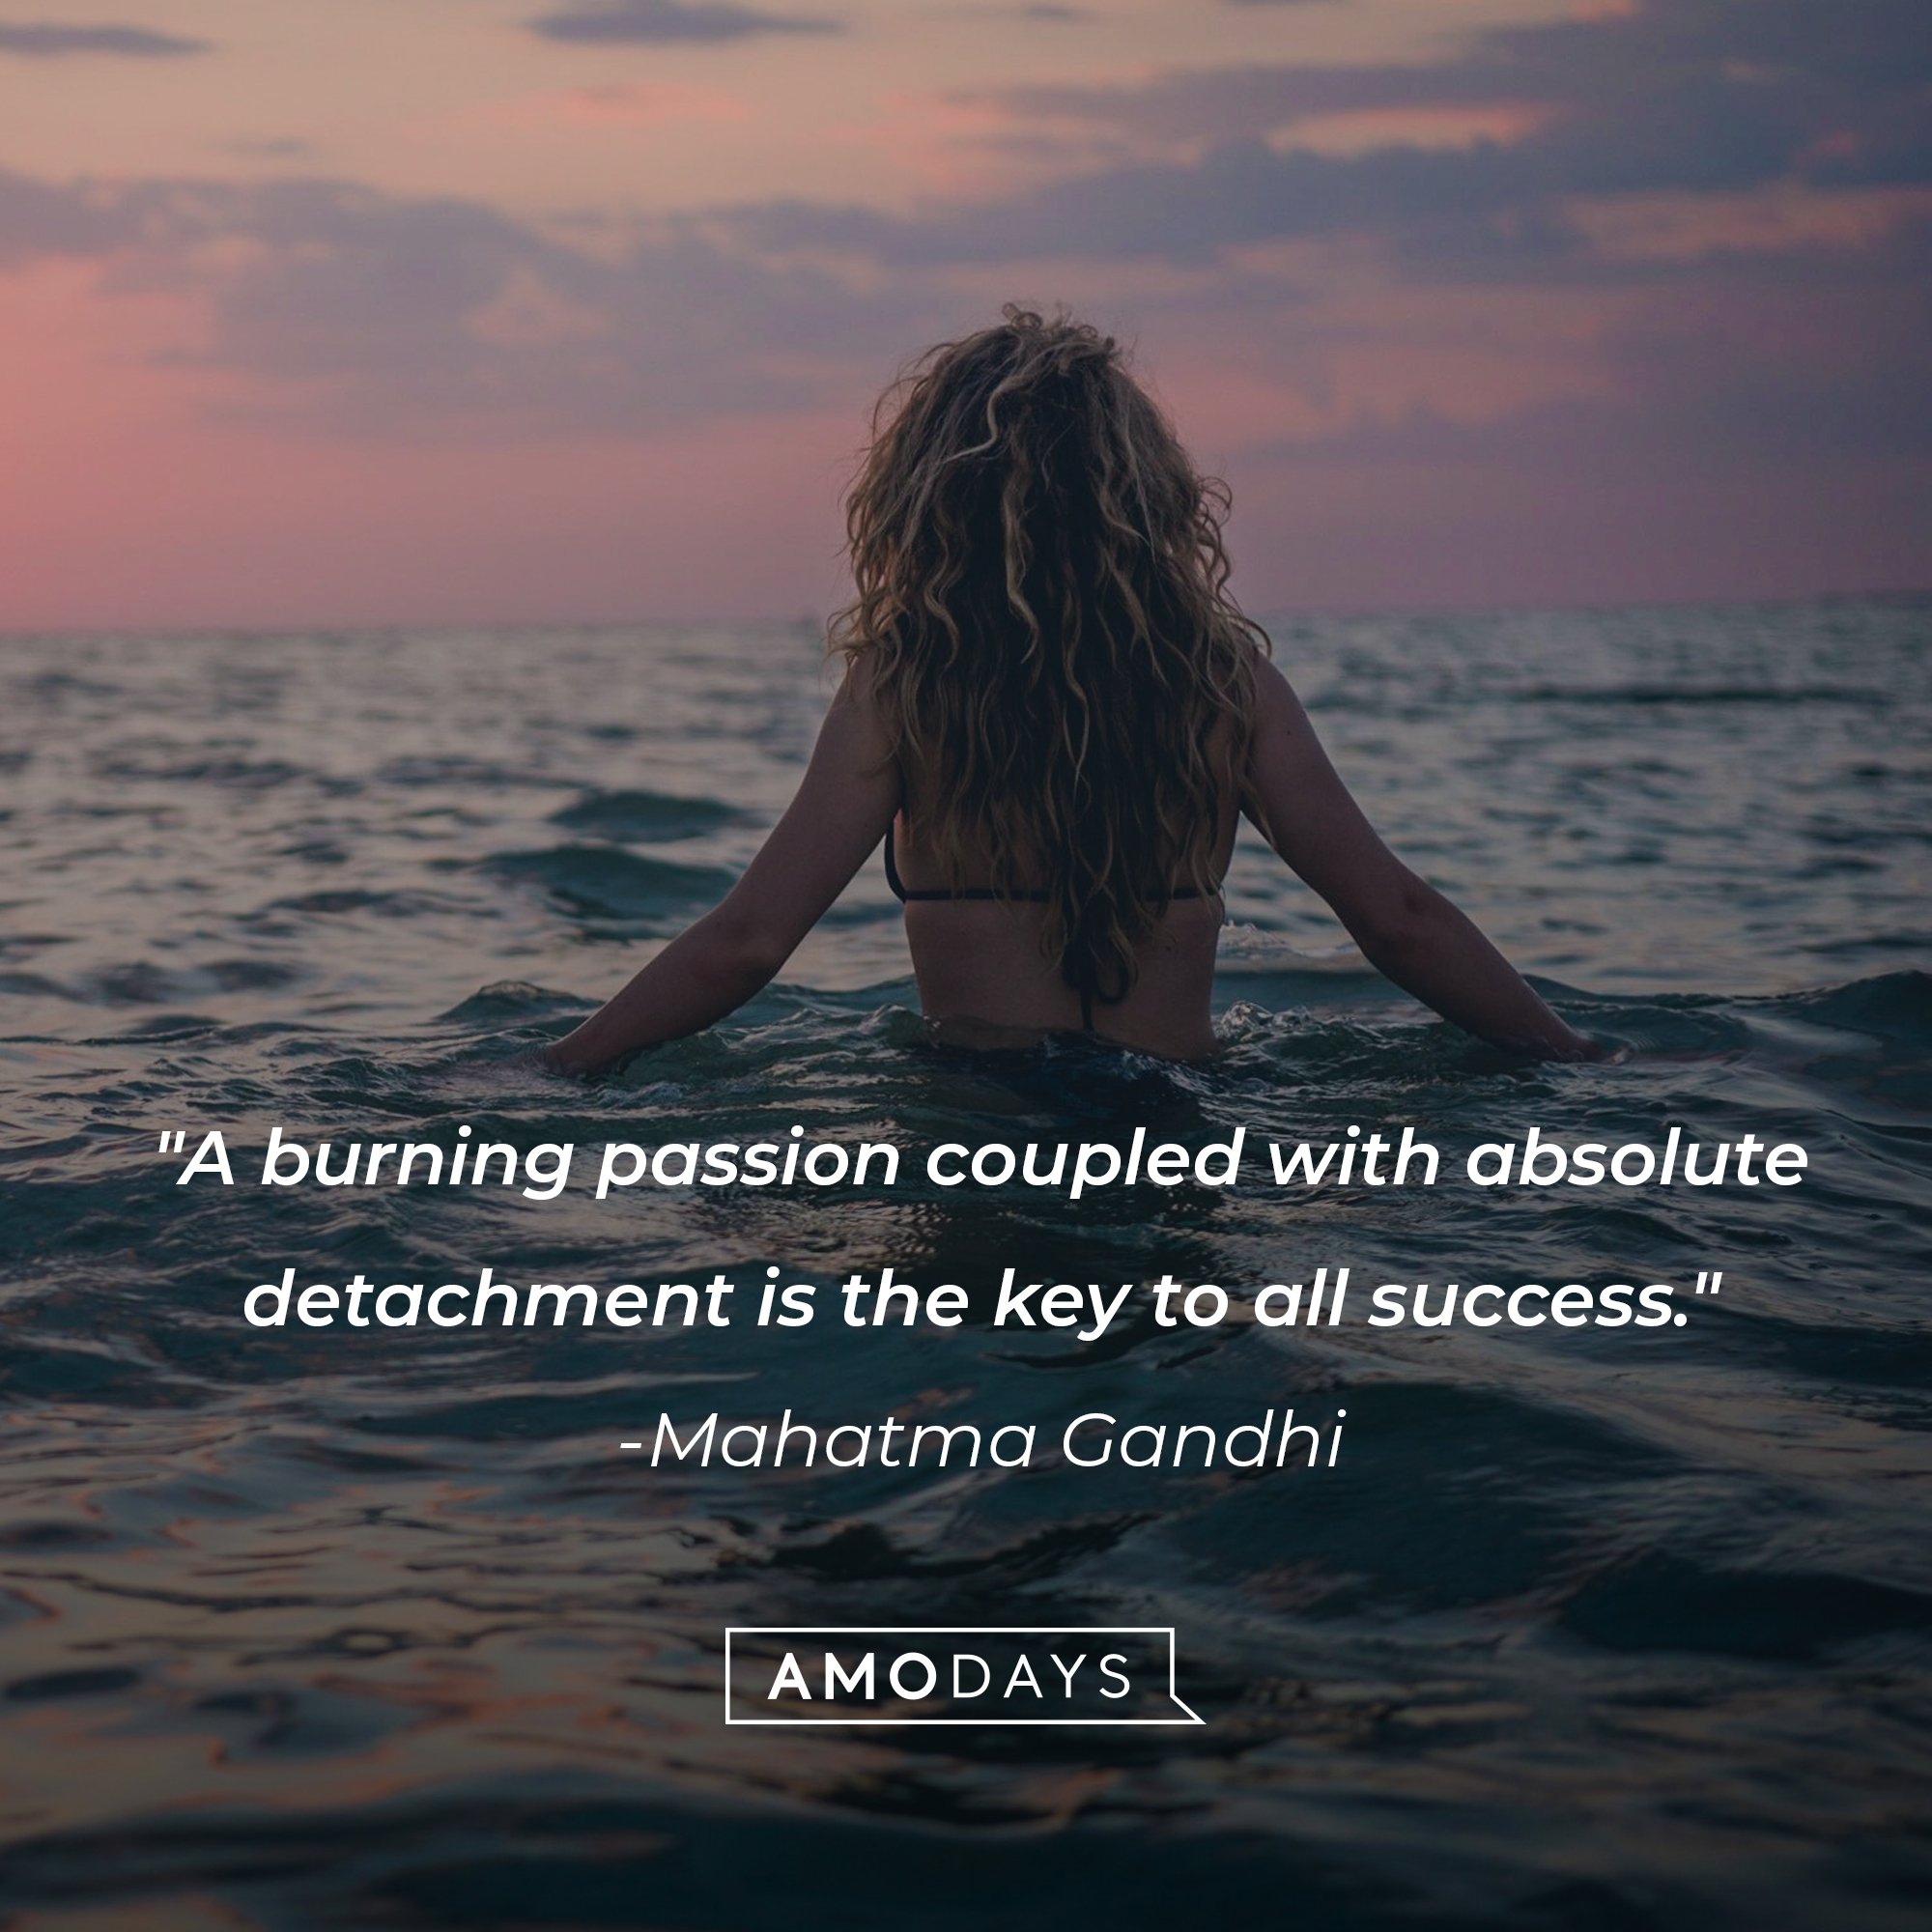 Mahatma Gandhi's quote: "A burning passion coupled with absolute detachment is the key to all success." | Image: AmoDays